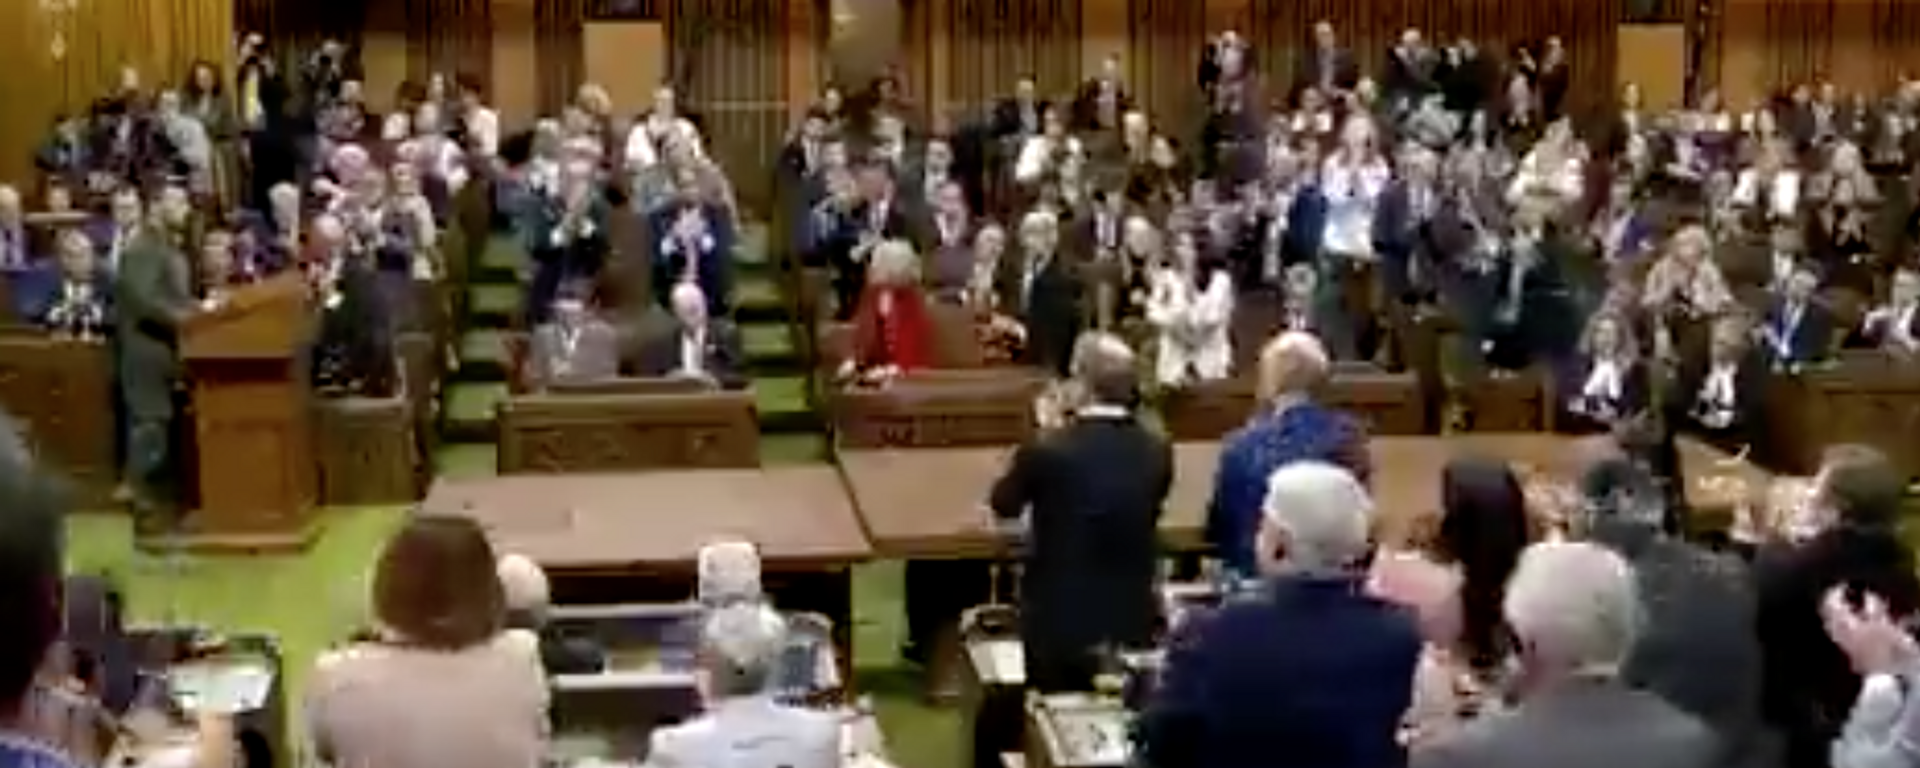 in the Canadian parliament, a 98-year-old ex-SS soldier who fought on the side of Hitler during the Second World War is greeted with standing ovation apparently for his Nazi past - Sputnik International, 1920, 24.09.2023